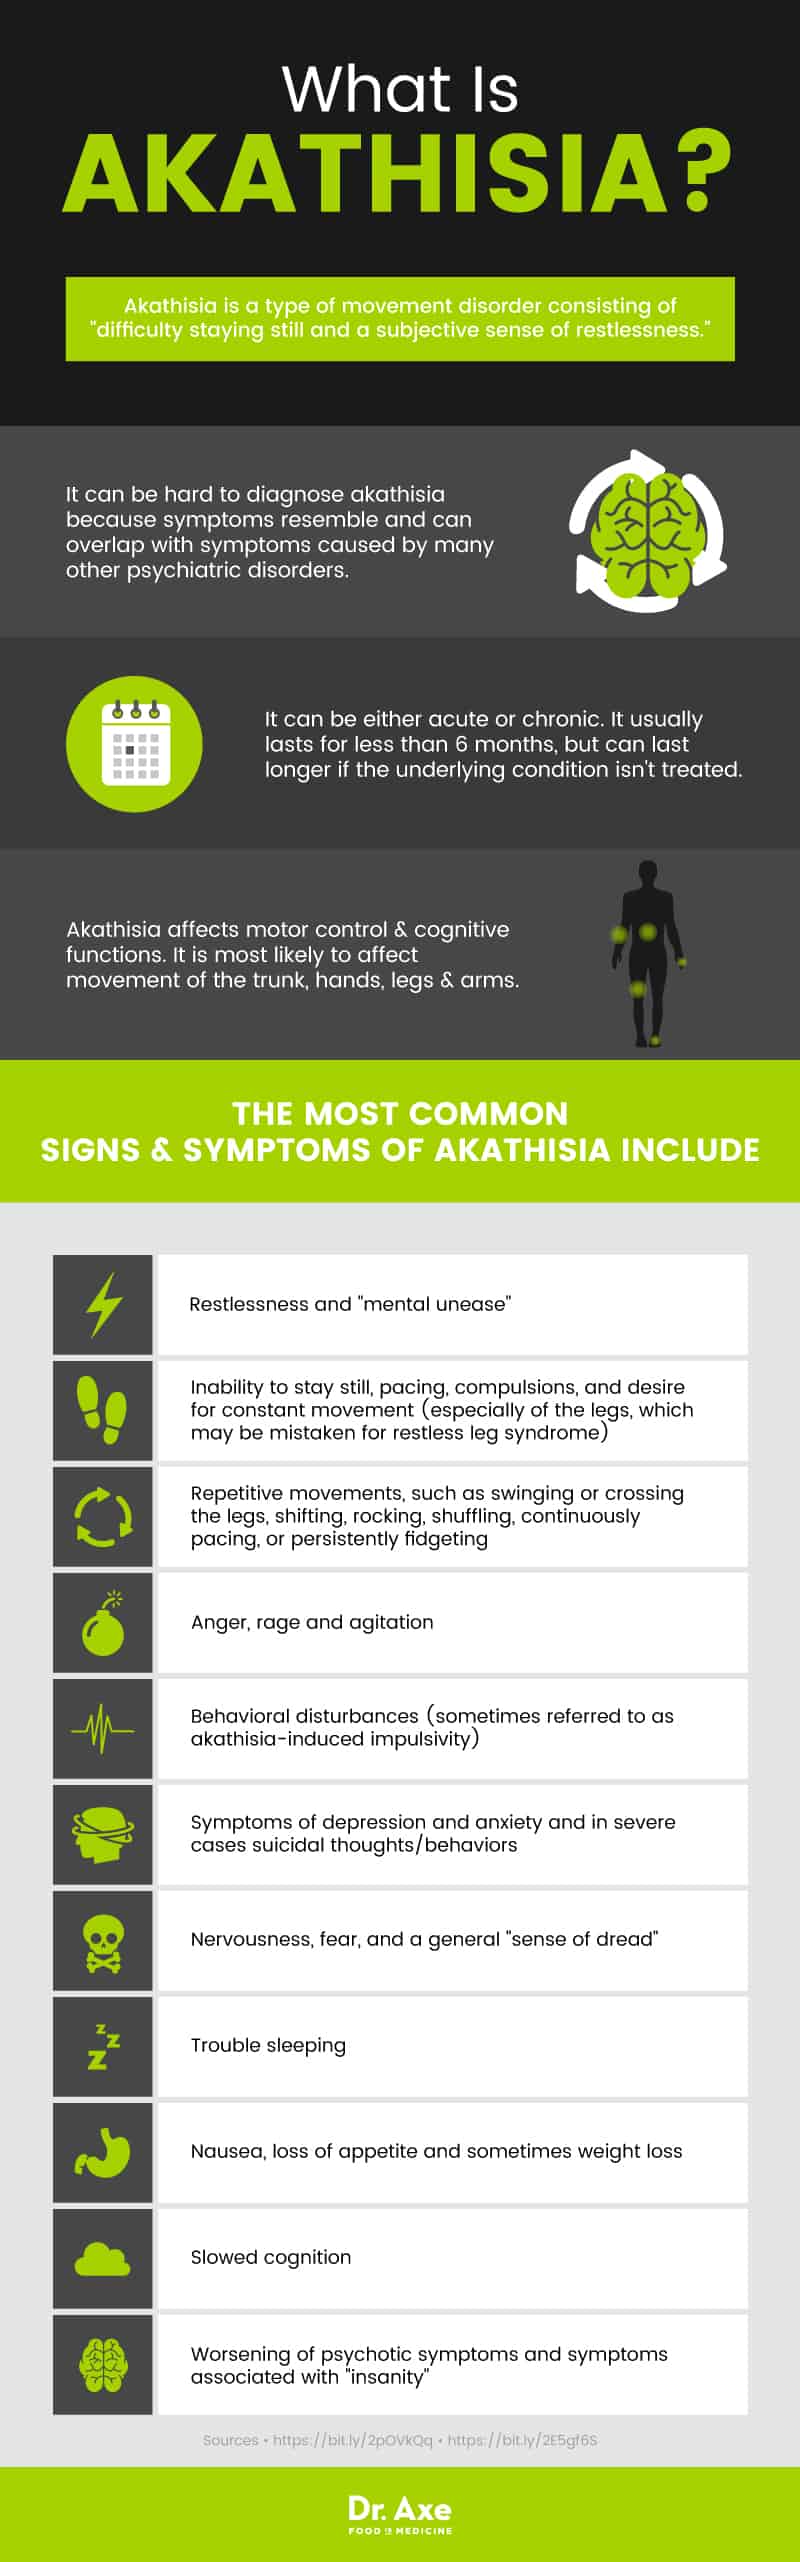 What is akathisia? - Dr. Axe